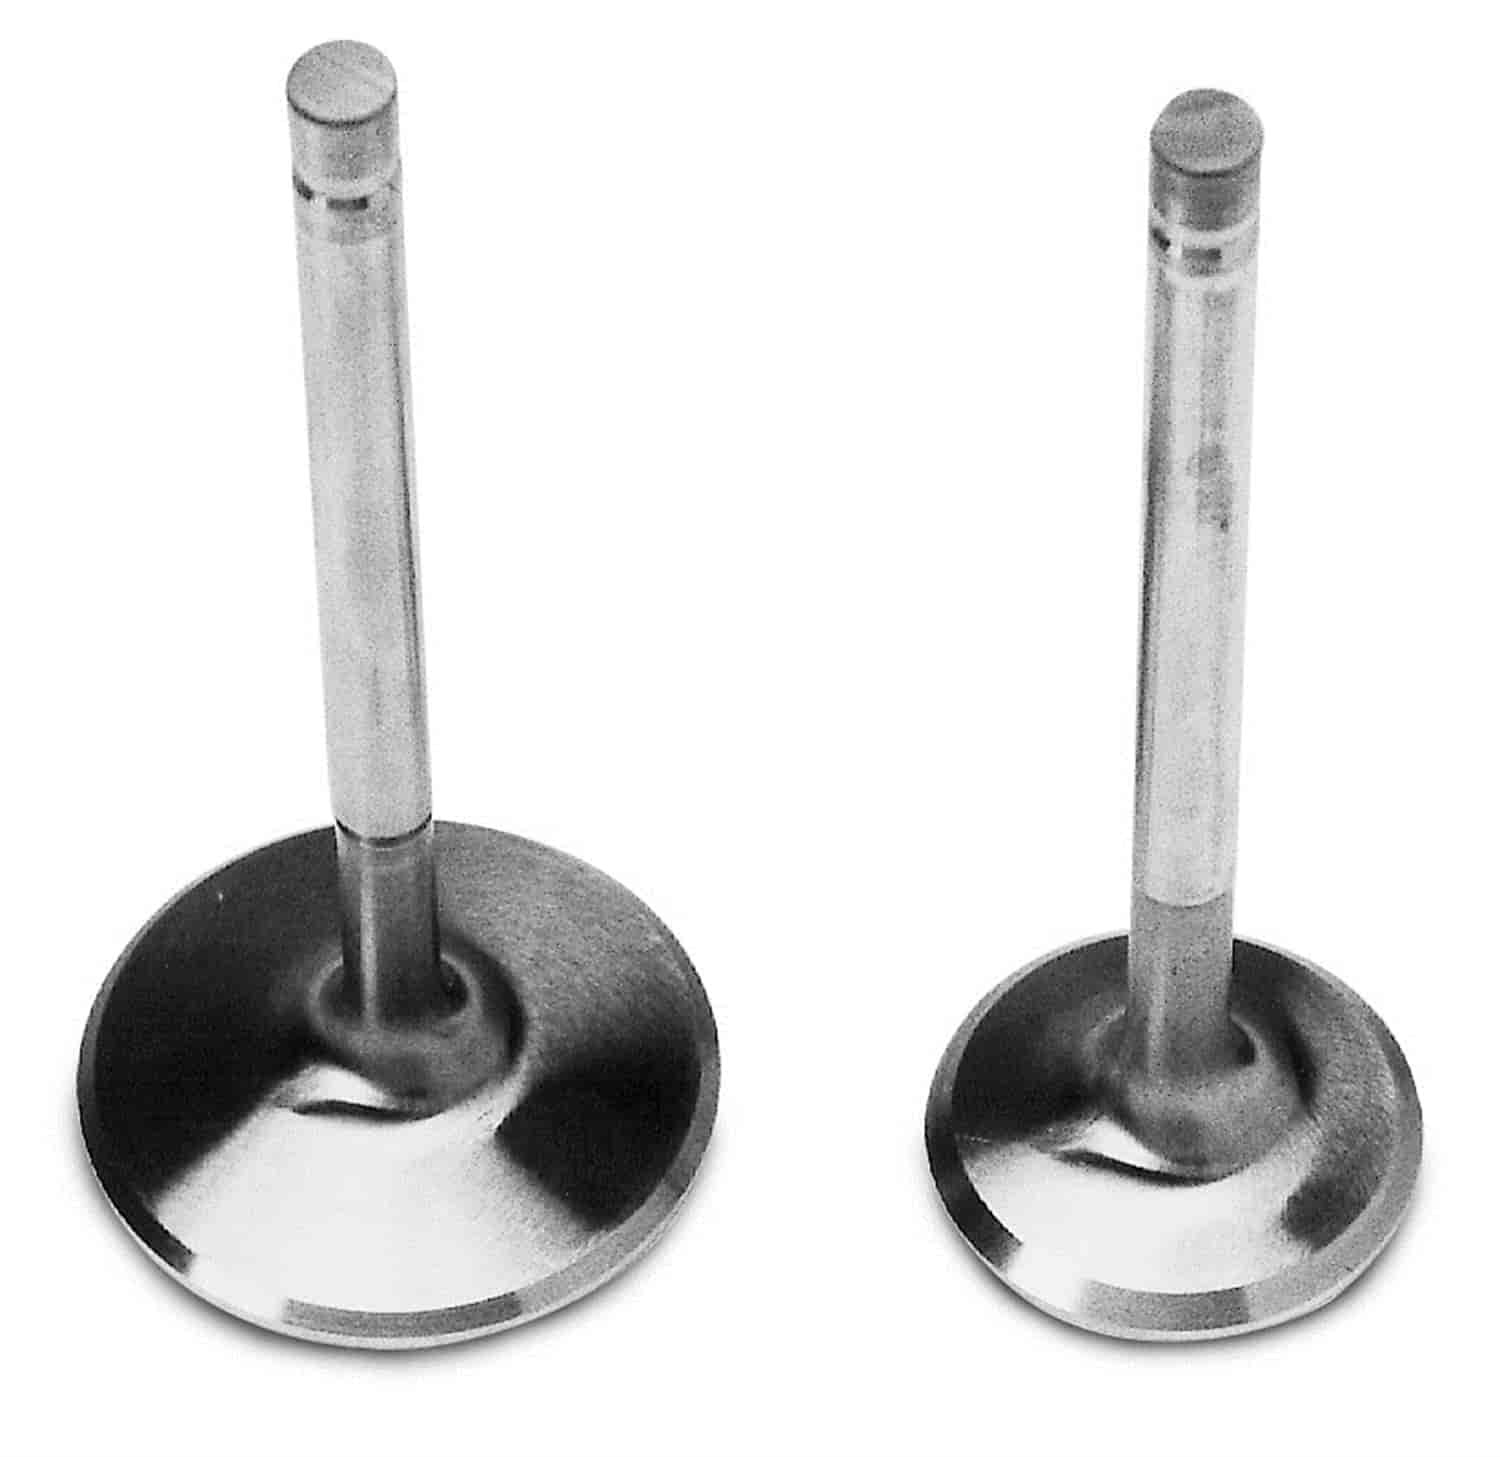 Exhaust Valve Set 1.72" for Chevy W-Series Performer RPM Heads #350-60809 & 350-60819